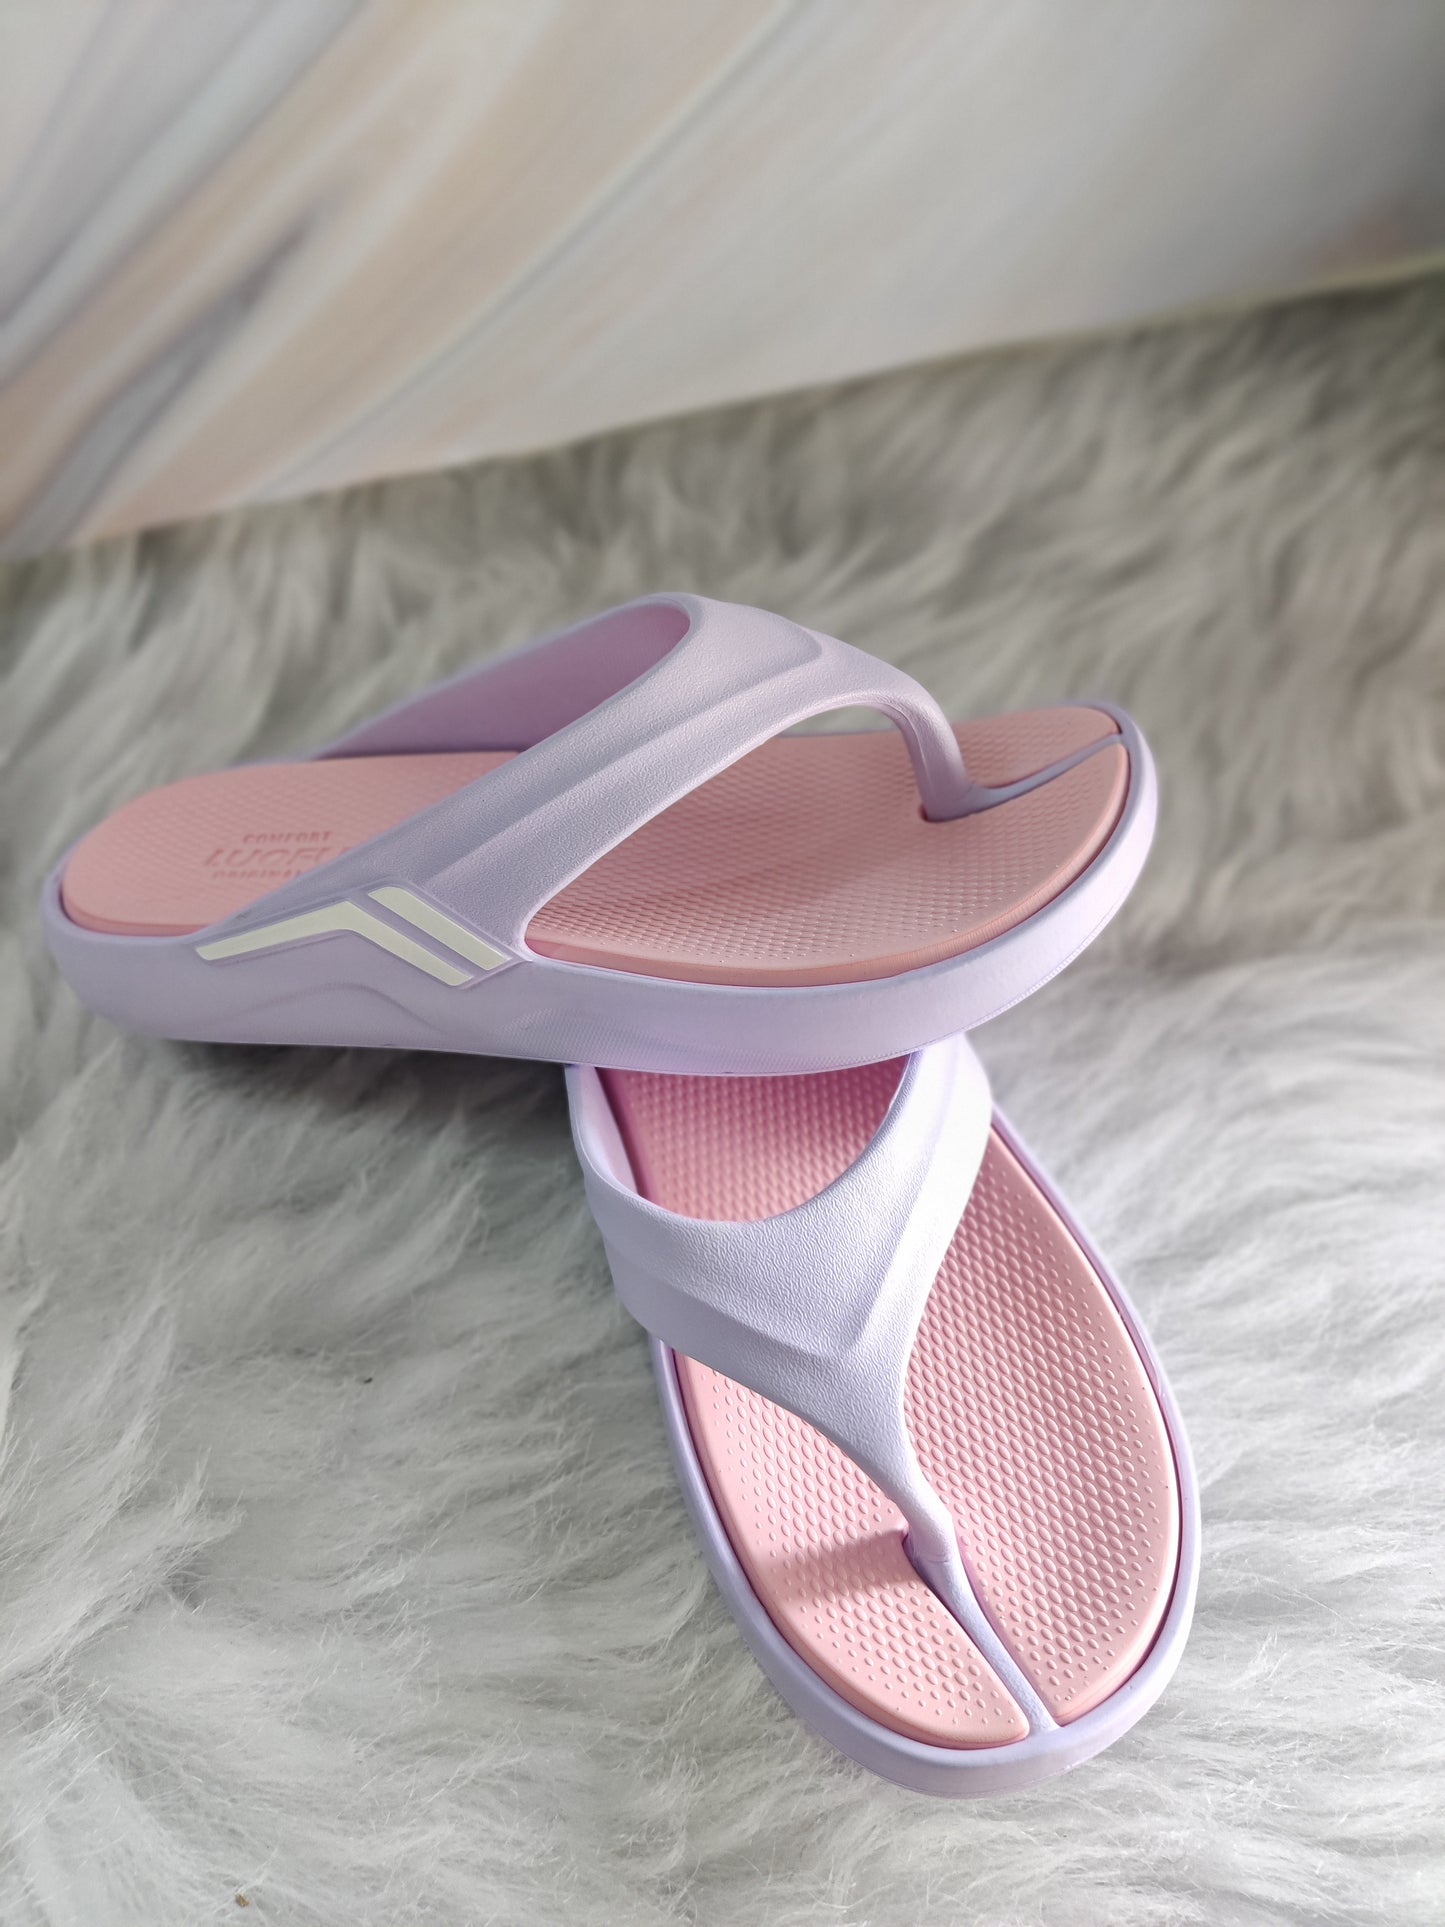 DUAL COLOR SLIPPERS - PURPLE